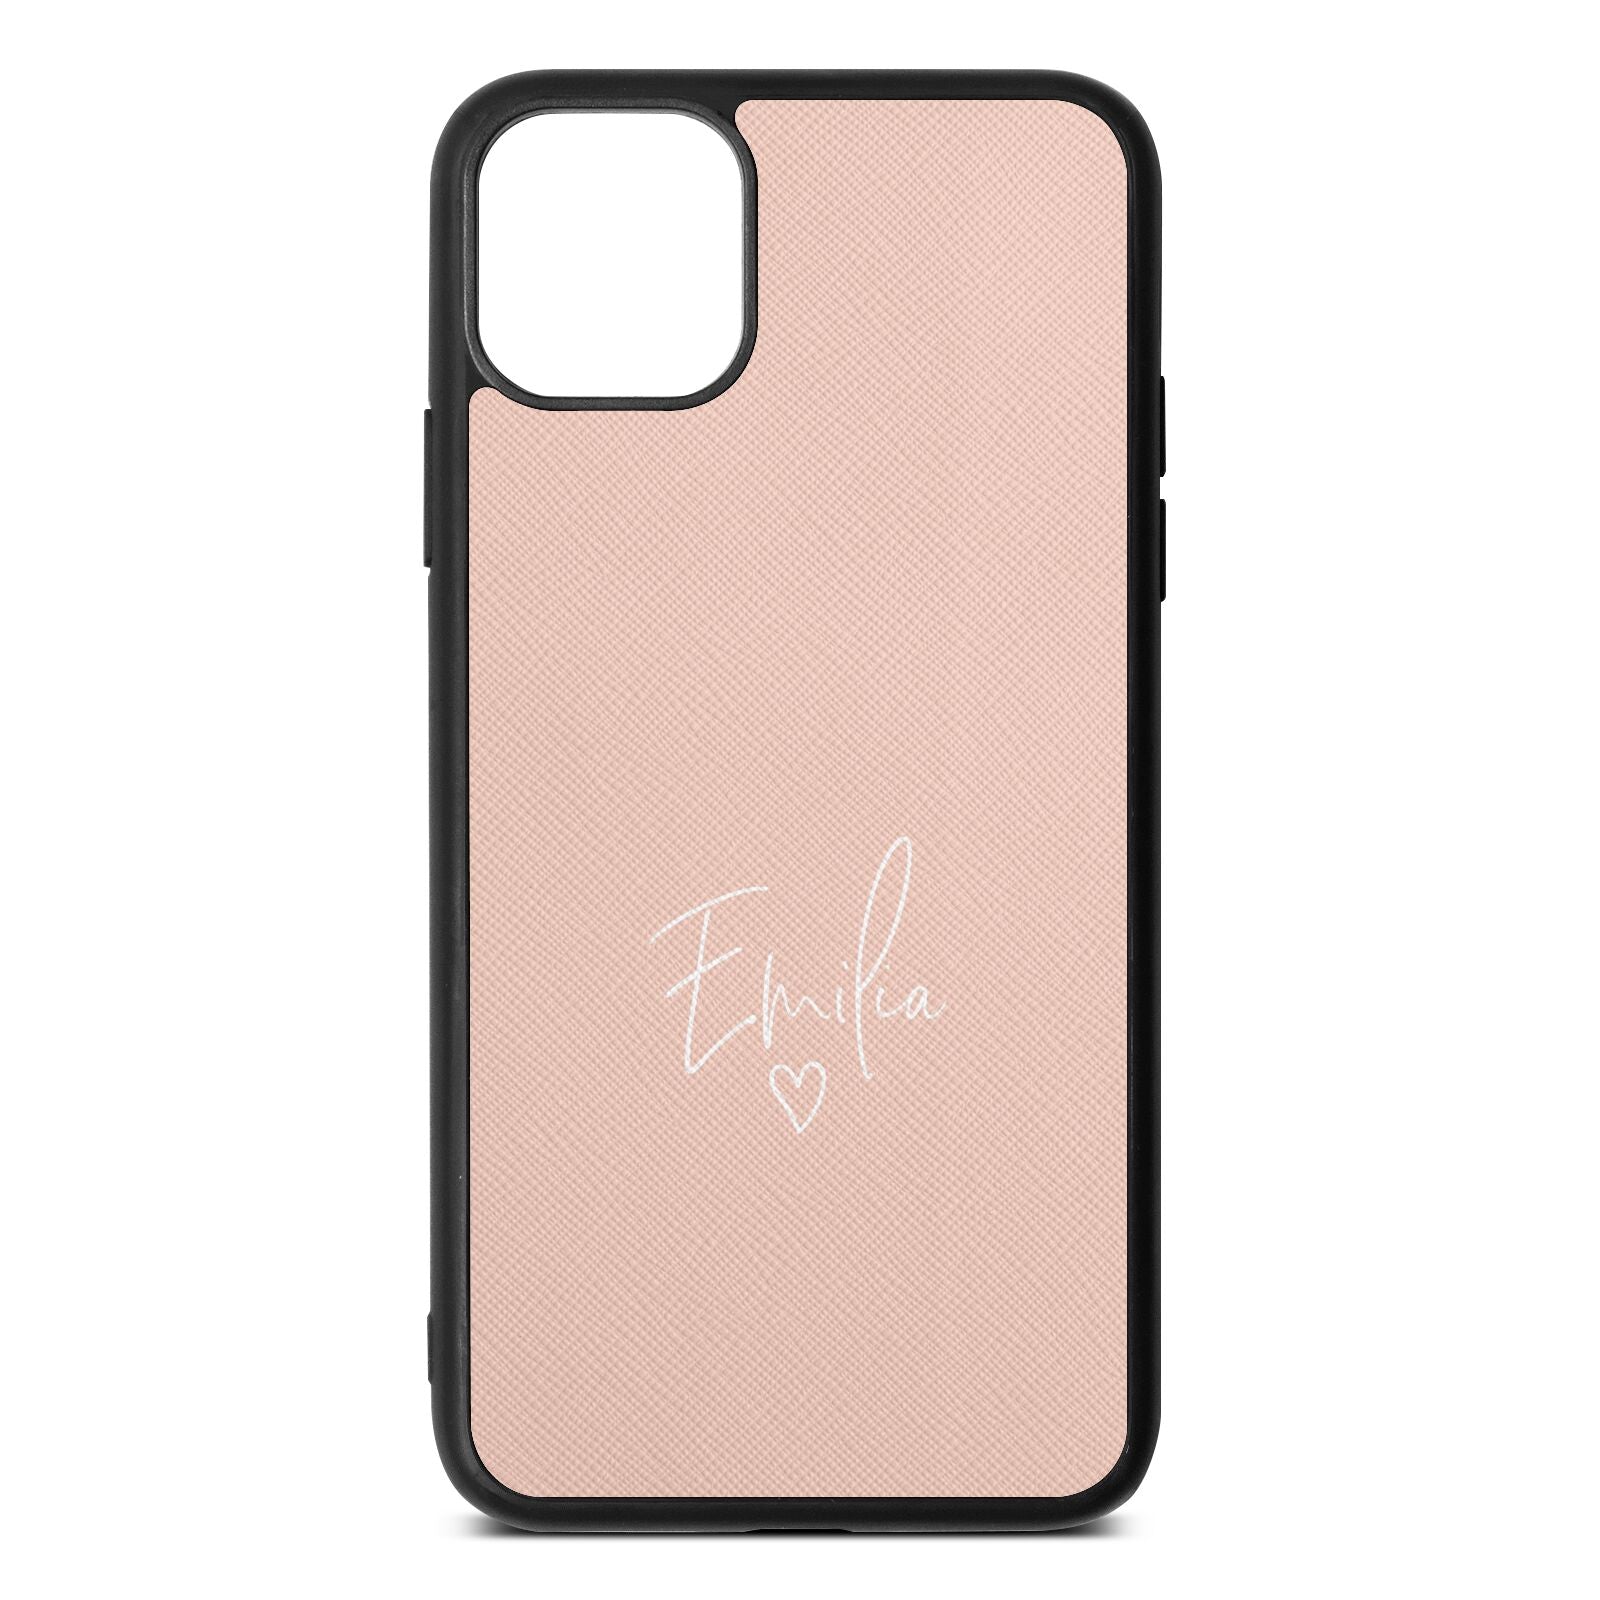 White Handwritten Name Transparent Nude Saffiano Leather iPhone 11 Pro Max Case